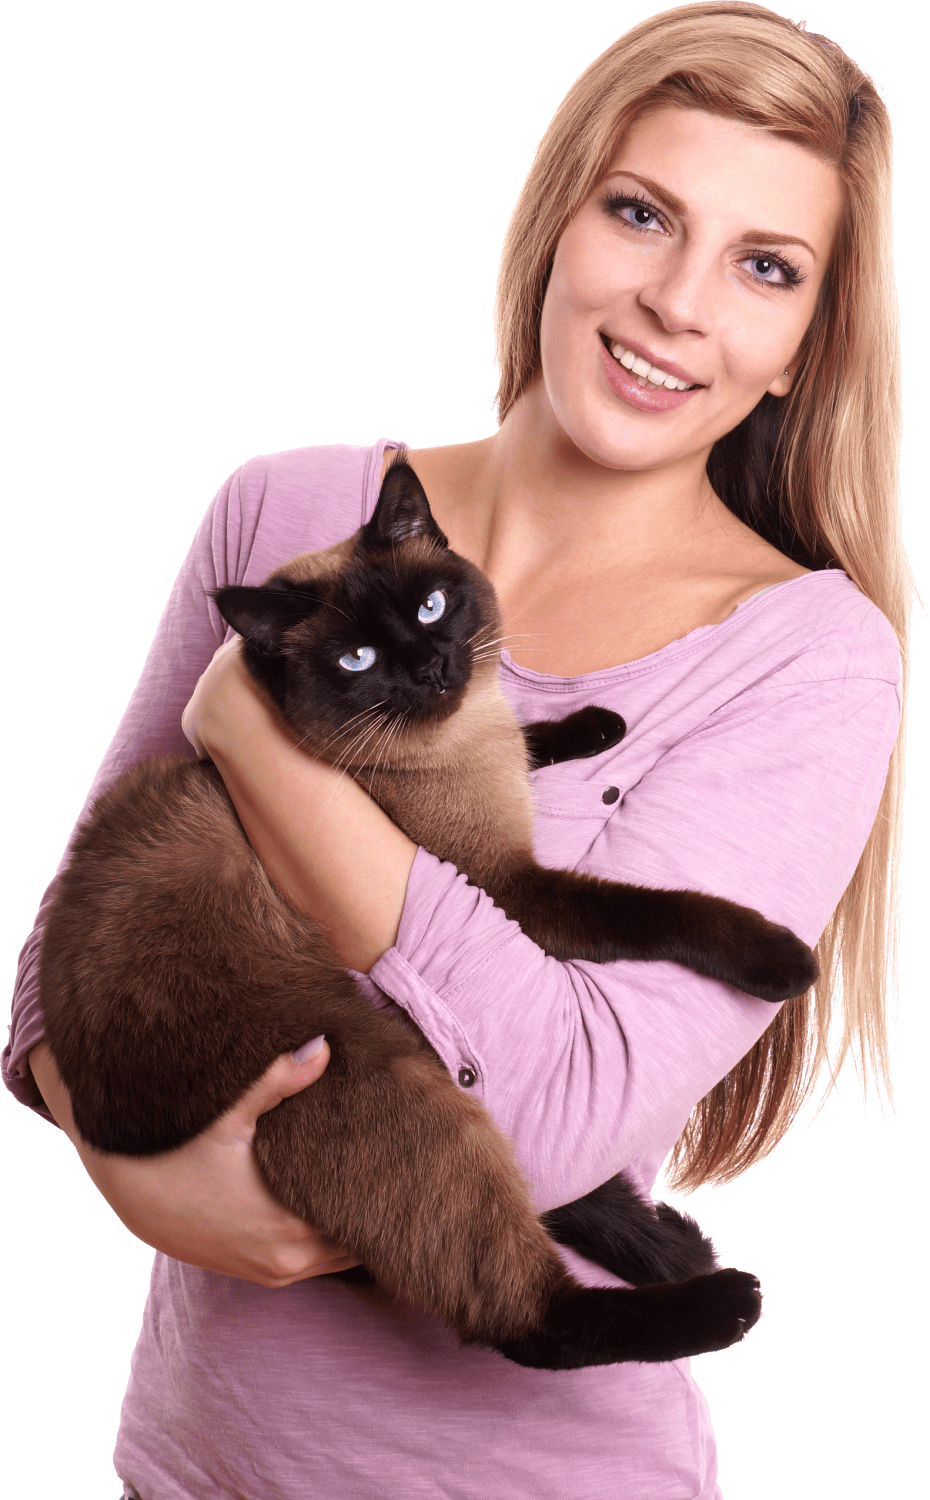 A woman holding a siamese cat in her arms.